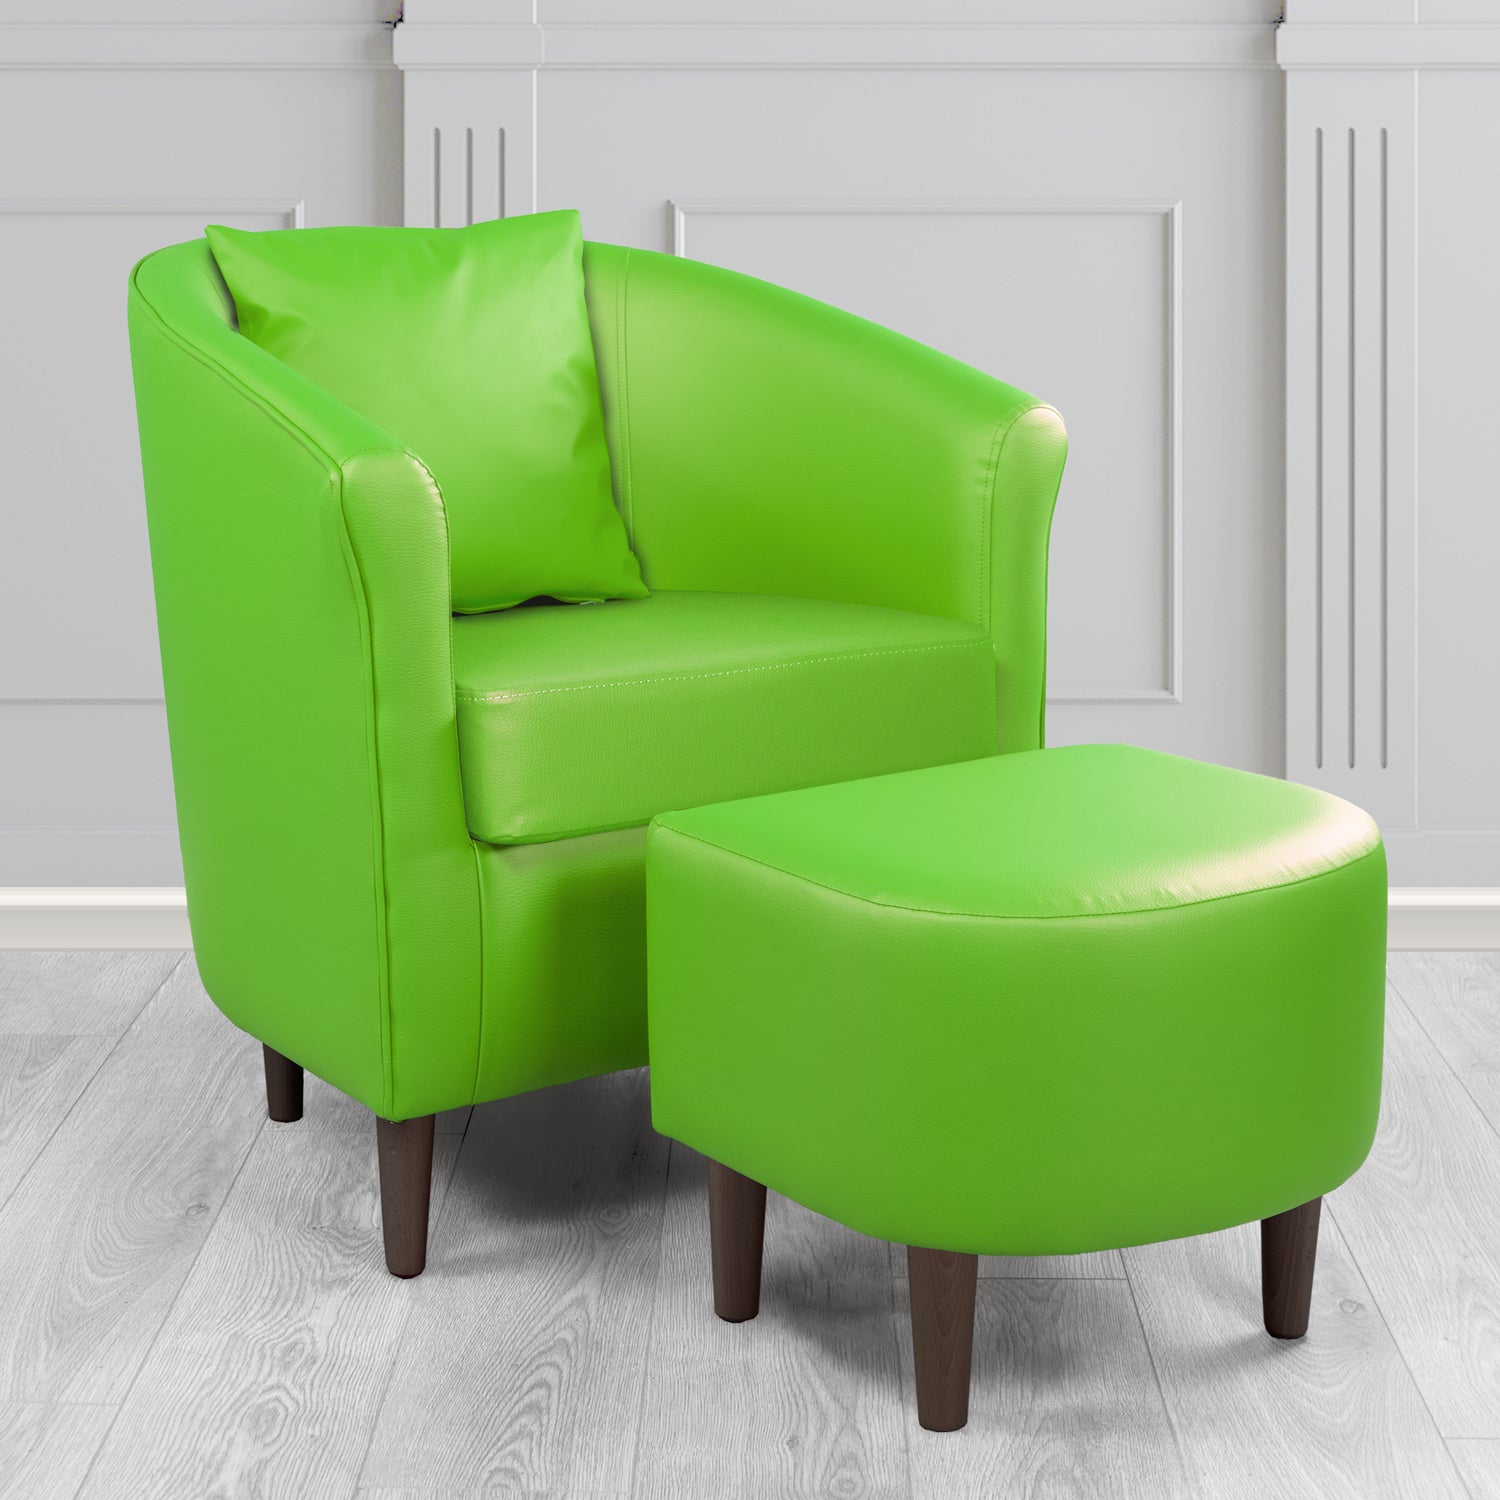 St Tropez Tub Chair with Footstool Set in Madrid Lime Faux Leather - The Tub Chair Shop